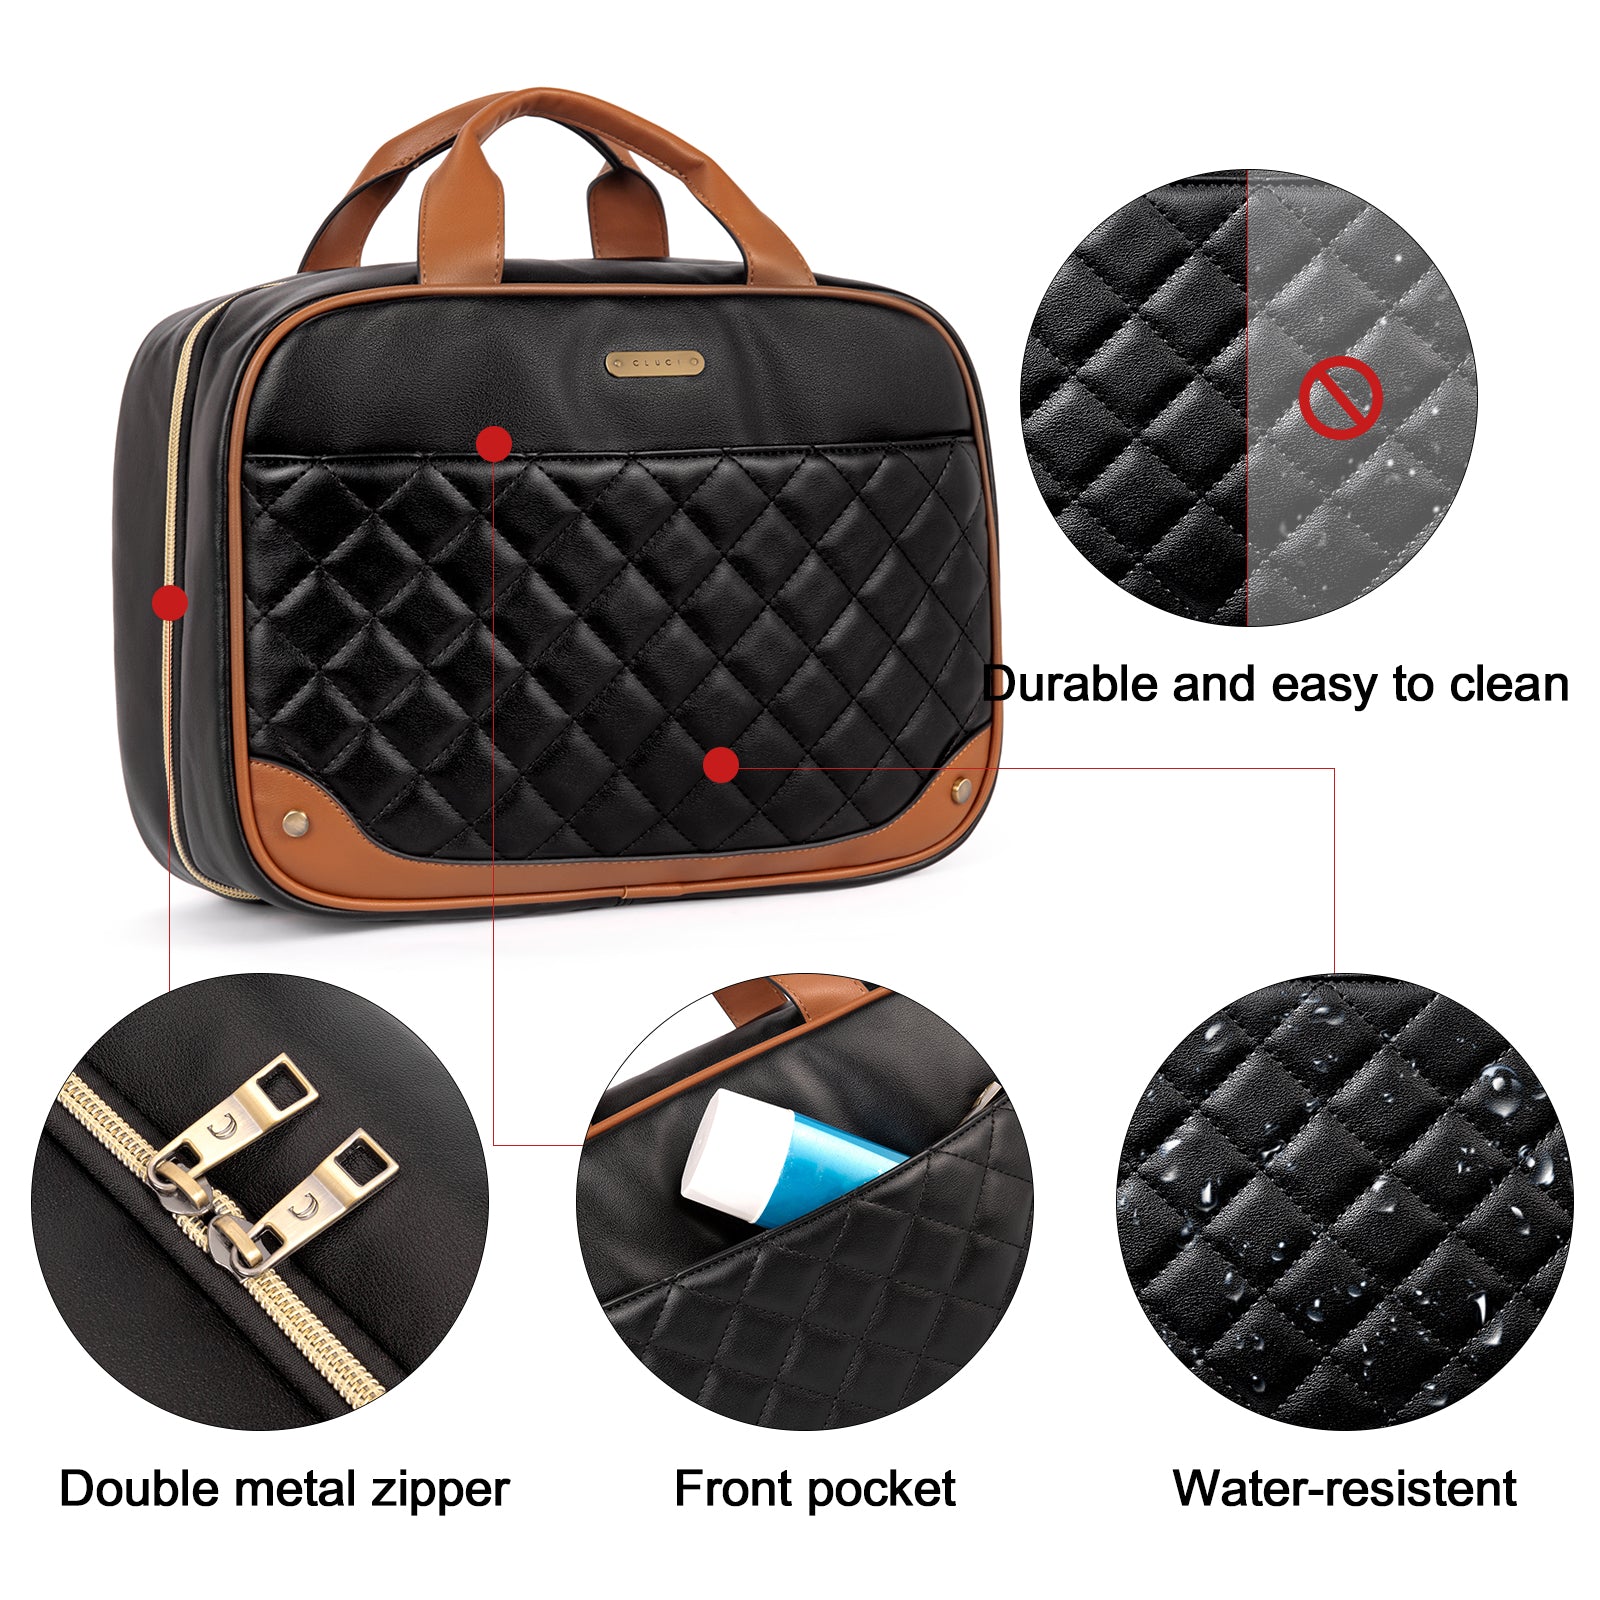 CLUCI Toiletry Bag for women / men Leather Travel Bag Water-resistant Large Makeup Cosmetic Bag Travel Organizer for Accessories with Hanging Hook, Full Sized Container, Toiletries